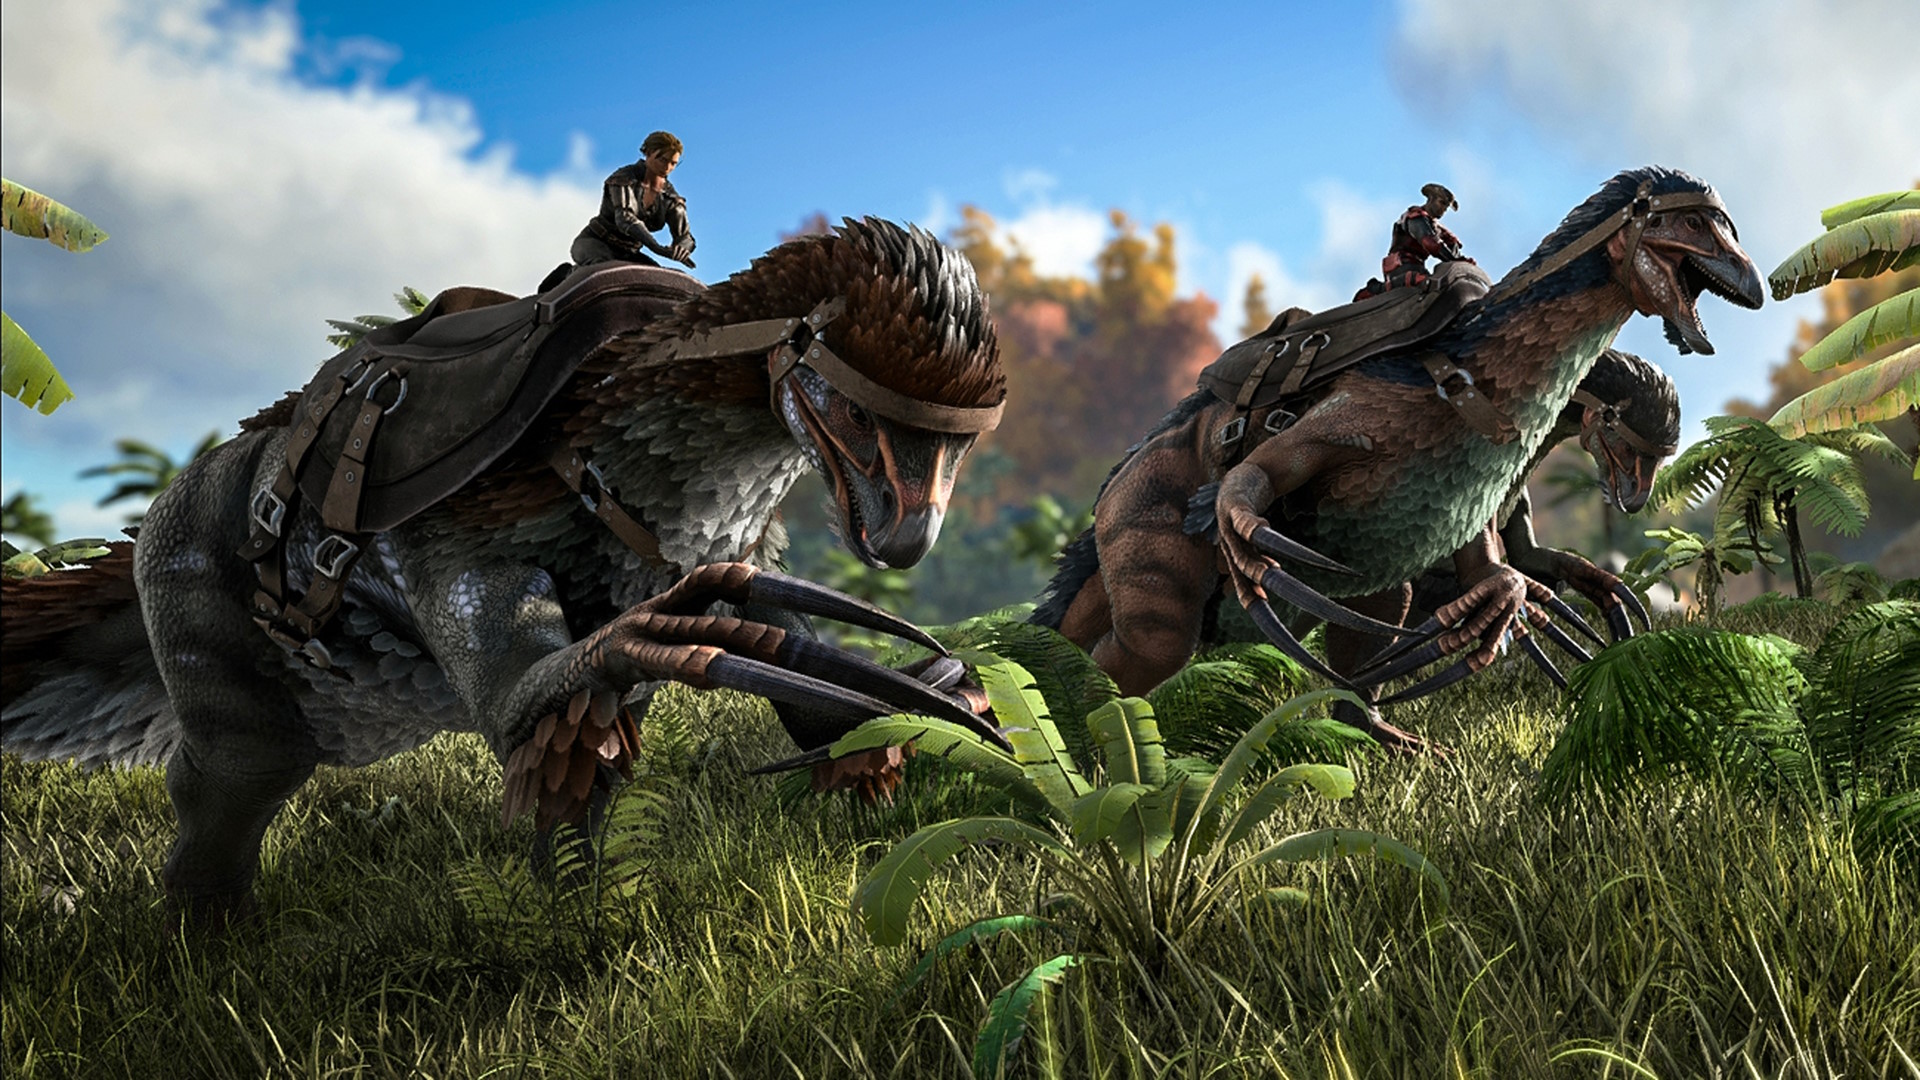 Ark Survival Evolved remastered - everything you need to know